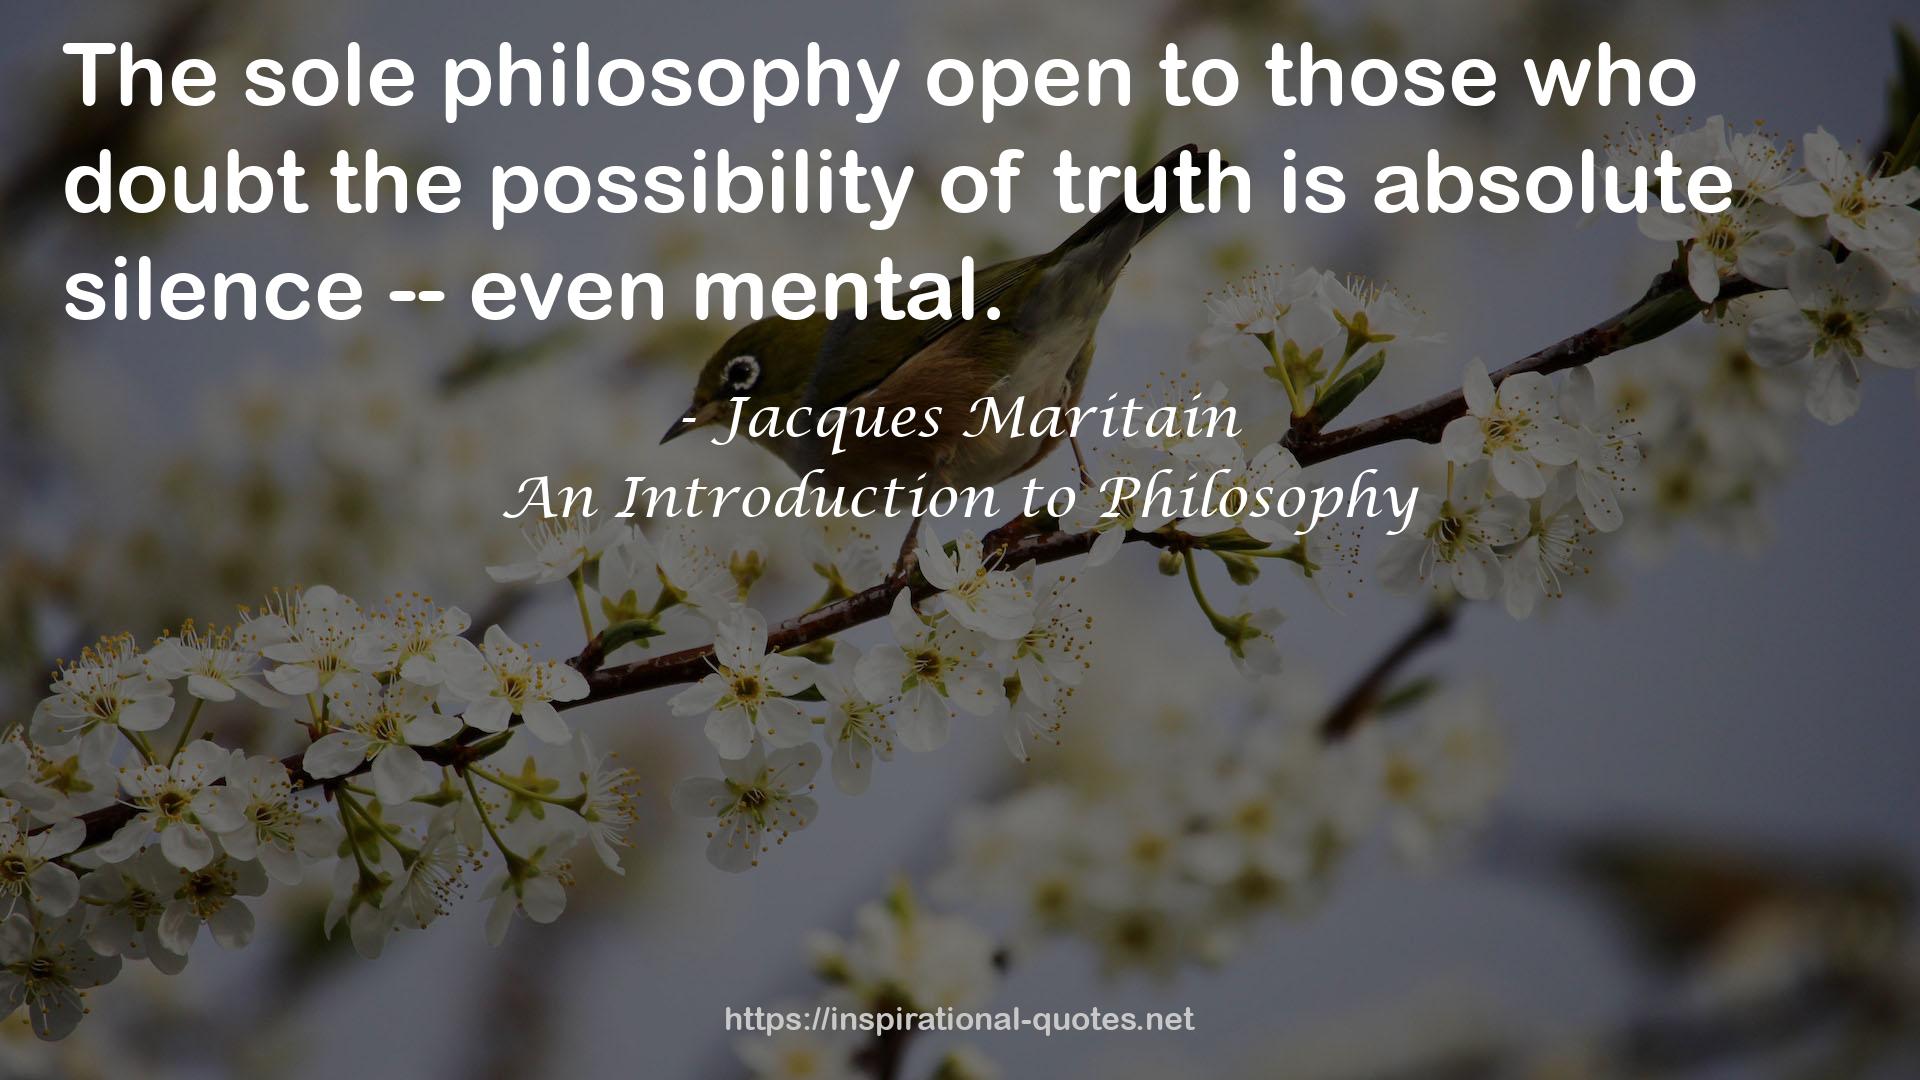 An Introduction to Philosophy QUOTES